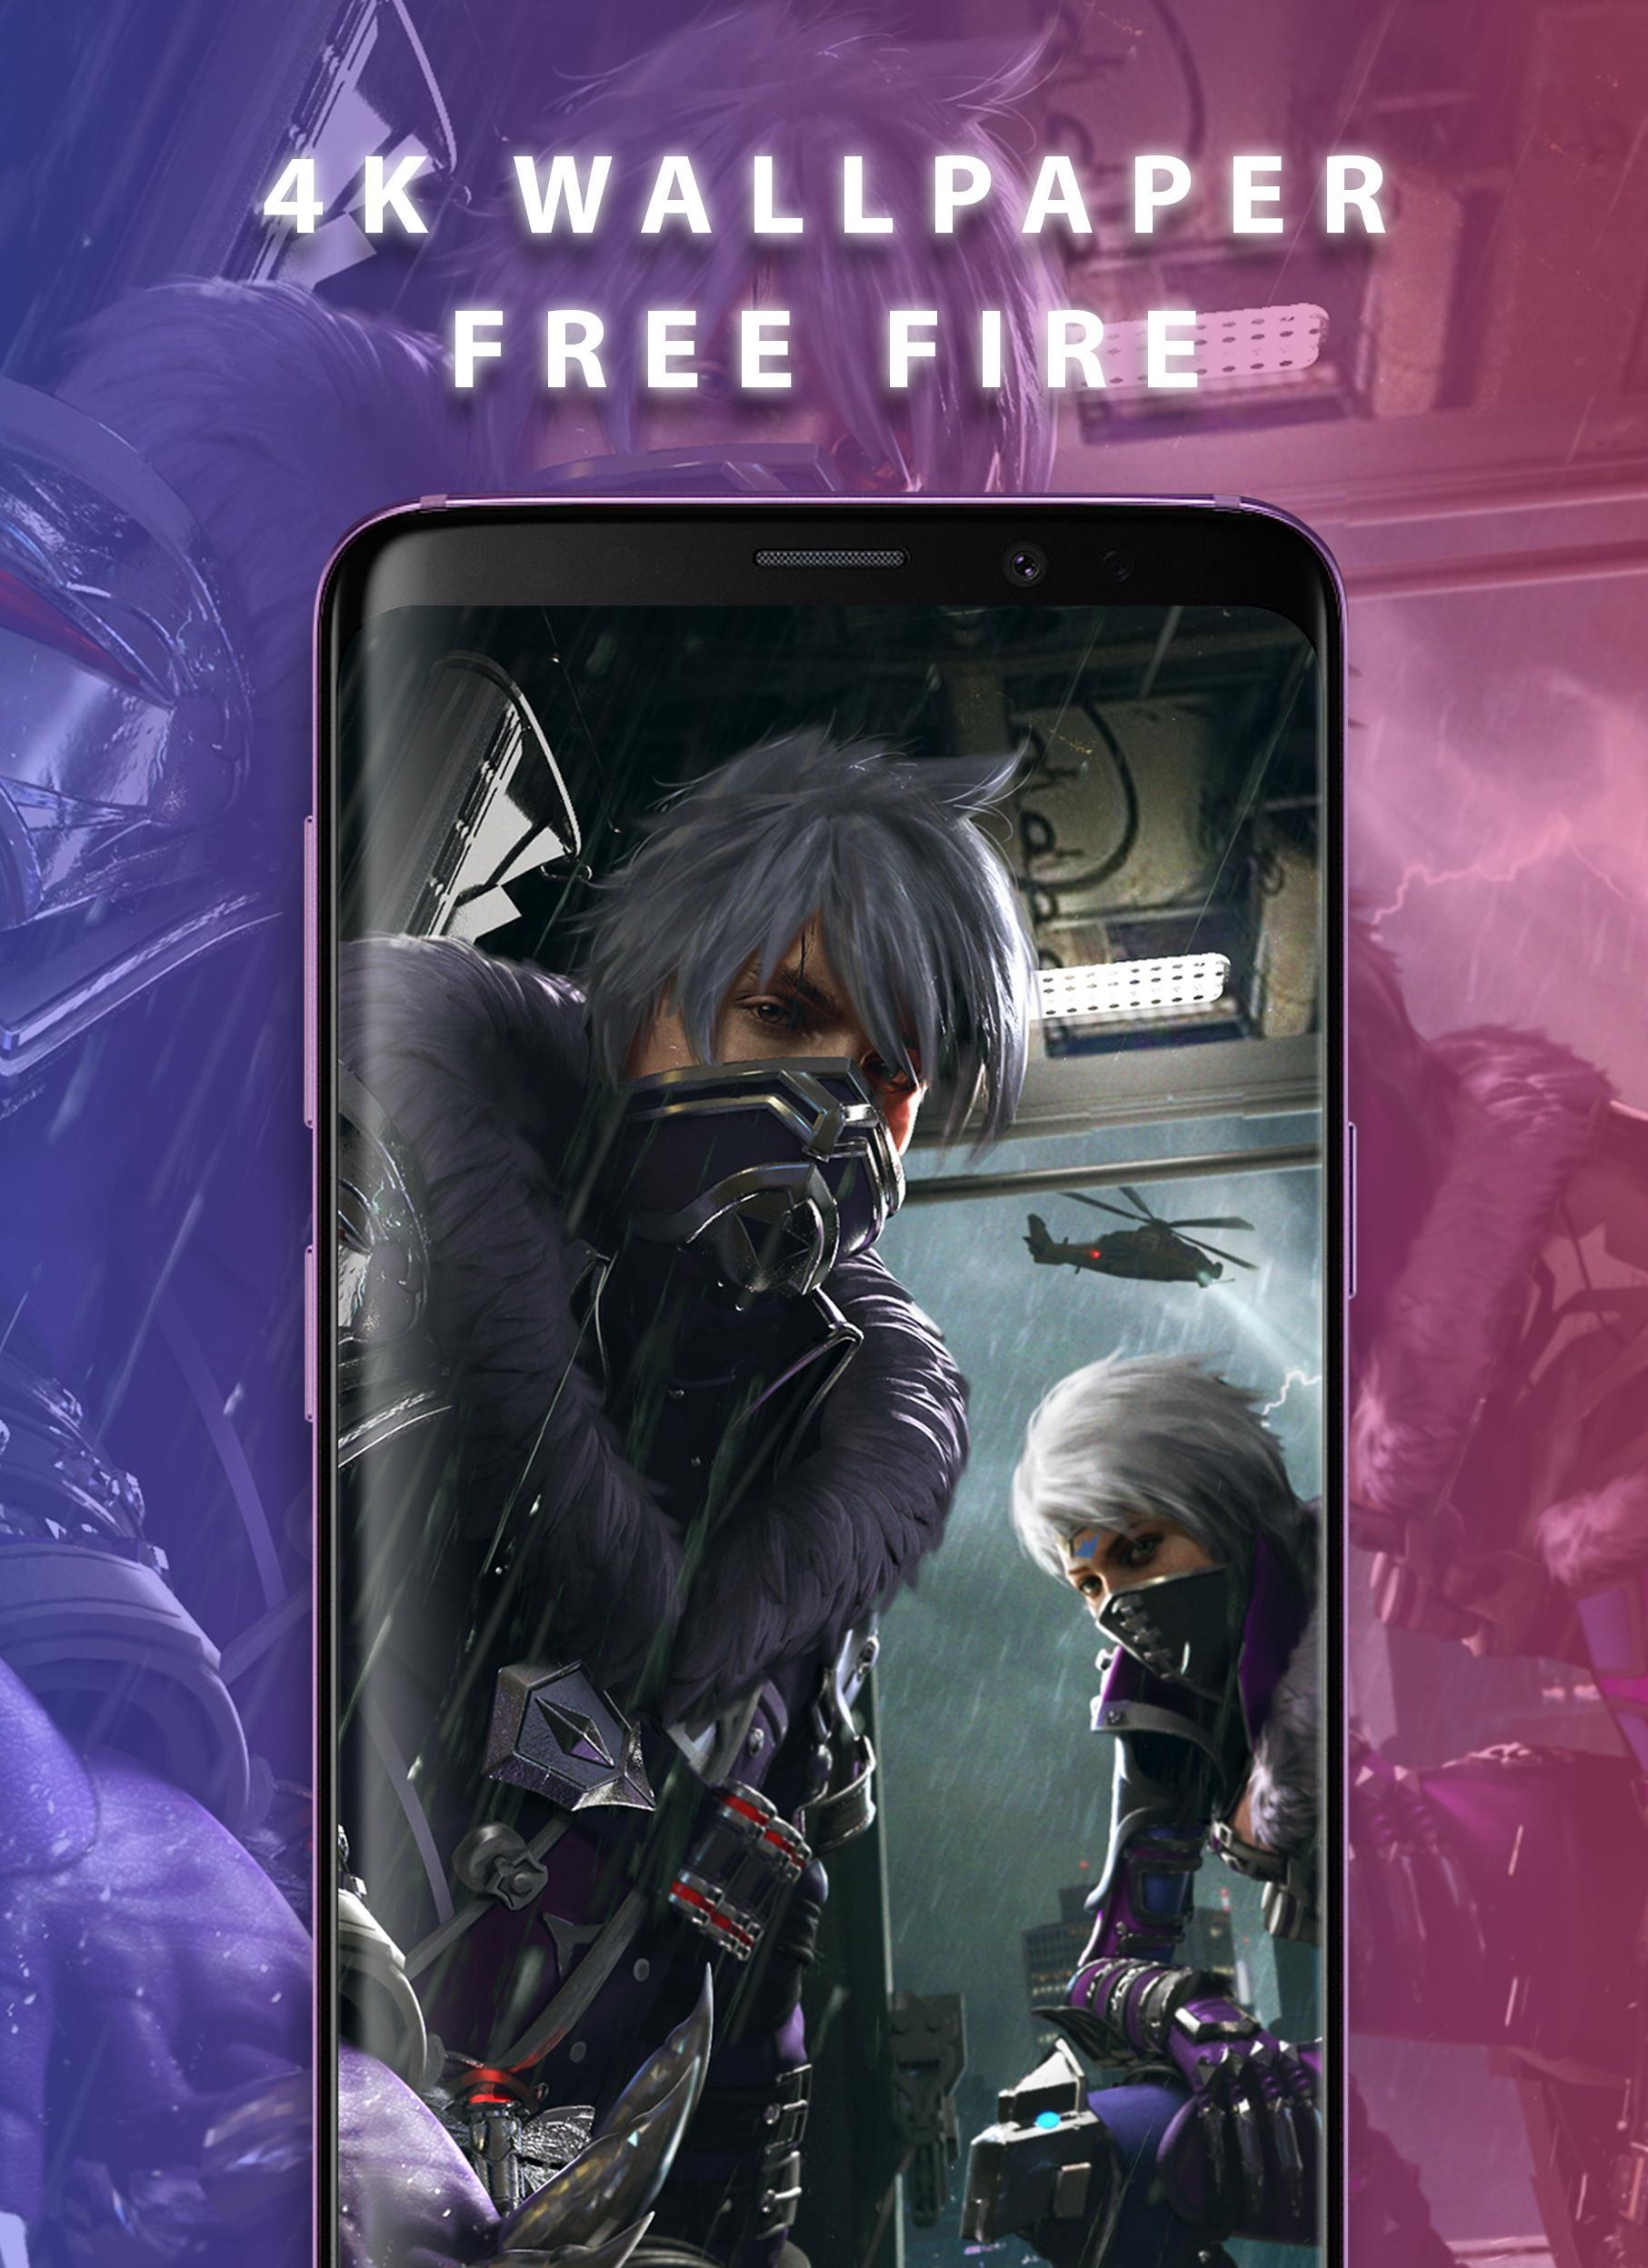 Free download 4K Wallpaper FF for Android APK Download [1813x2495] for your  Desktop, Mobile & Tablet | Explore 26+ Free Fire Elite Pass Wallpapers |  Fire Wallpaper Free, Free Fire Wallpaper, Psycho Pass Wallpaper